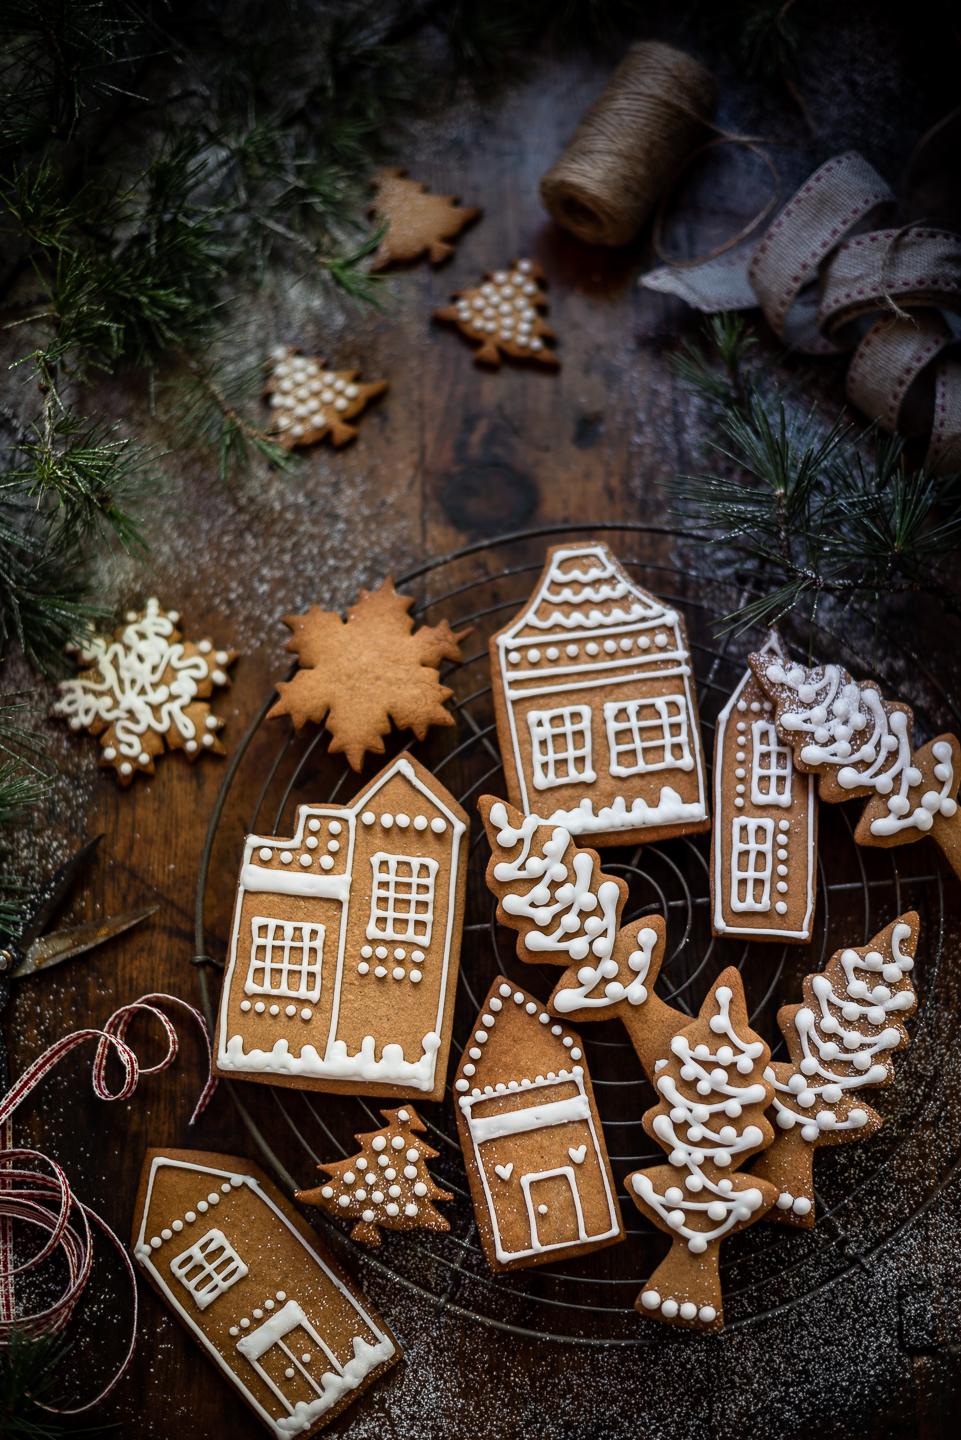 Snappy Gingerbread Cookies